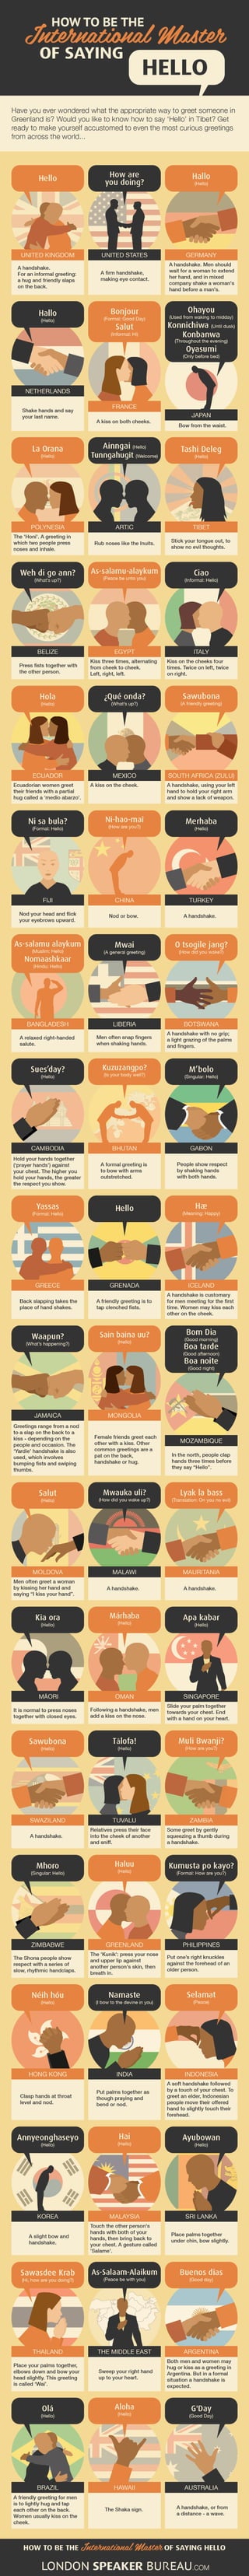 How to be the International Master of Saying Hello